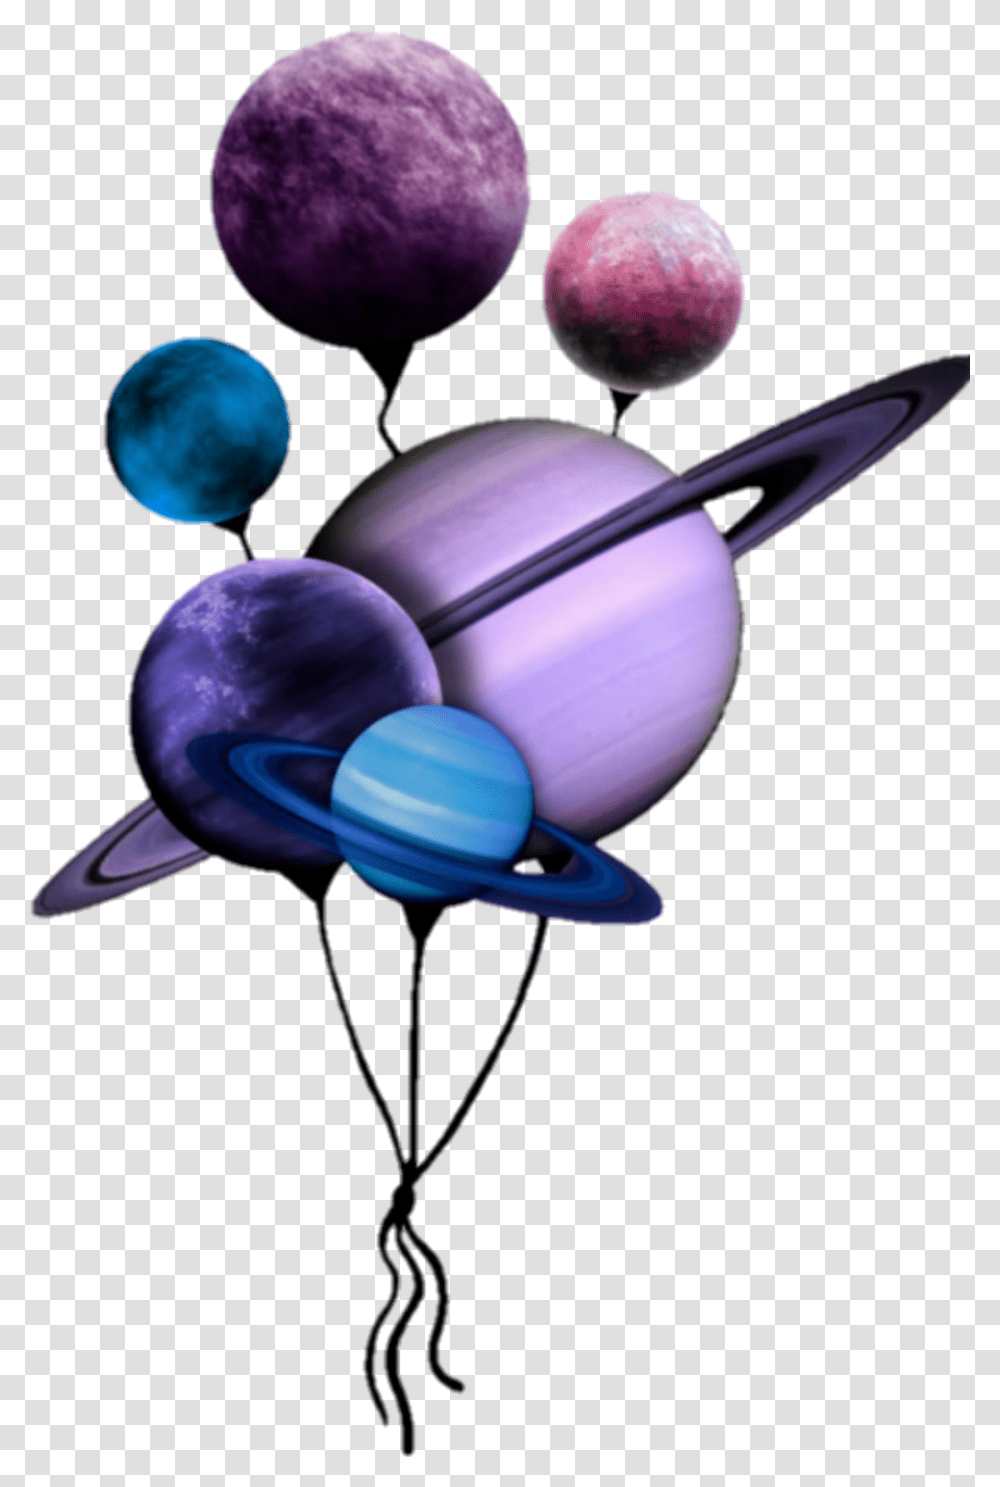 Baloes Planetas Planets Balloon Clipart, Outer Space, Astronomy, Universe, Globe Transparent Png